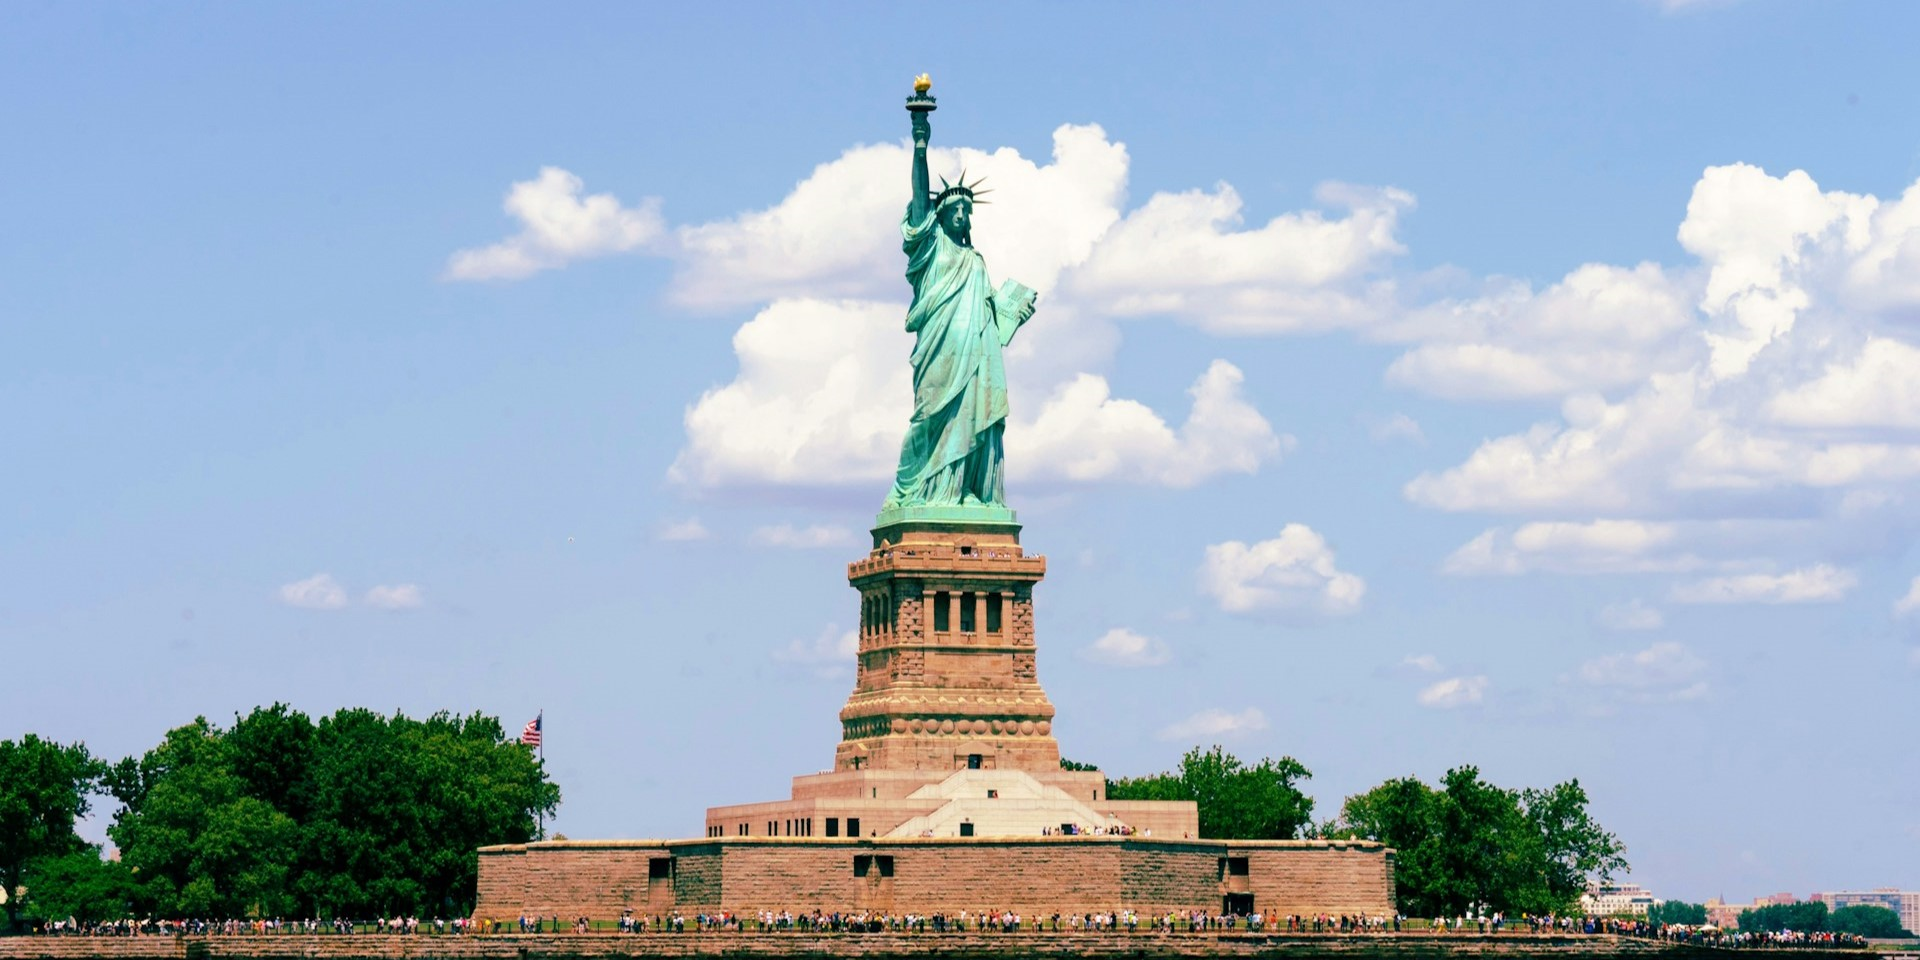 How the Statue of Liberty Became the Symbol for “The American Dream”